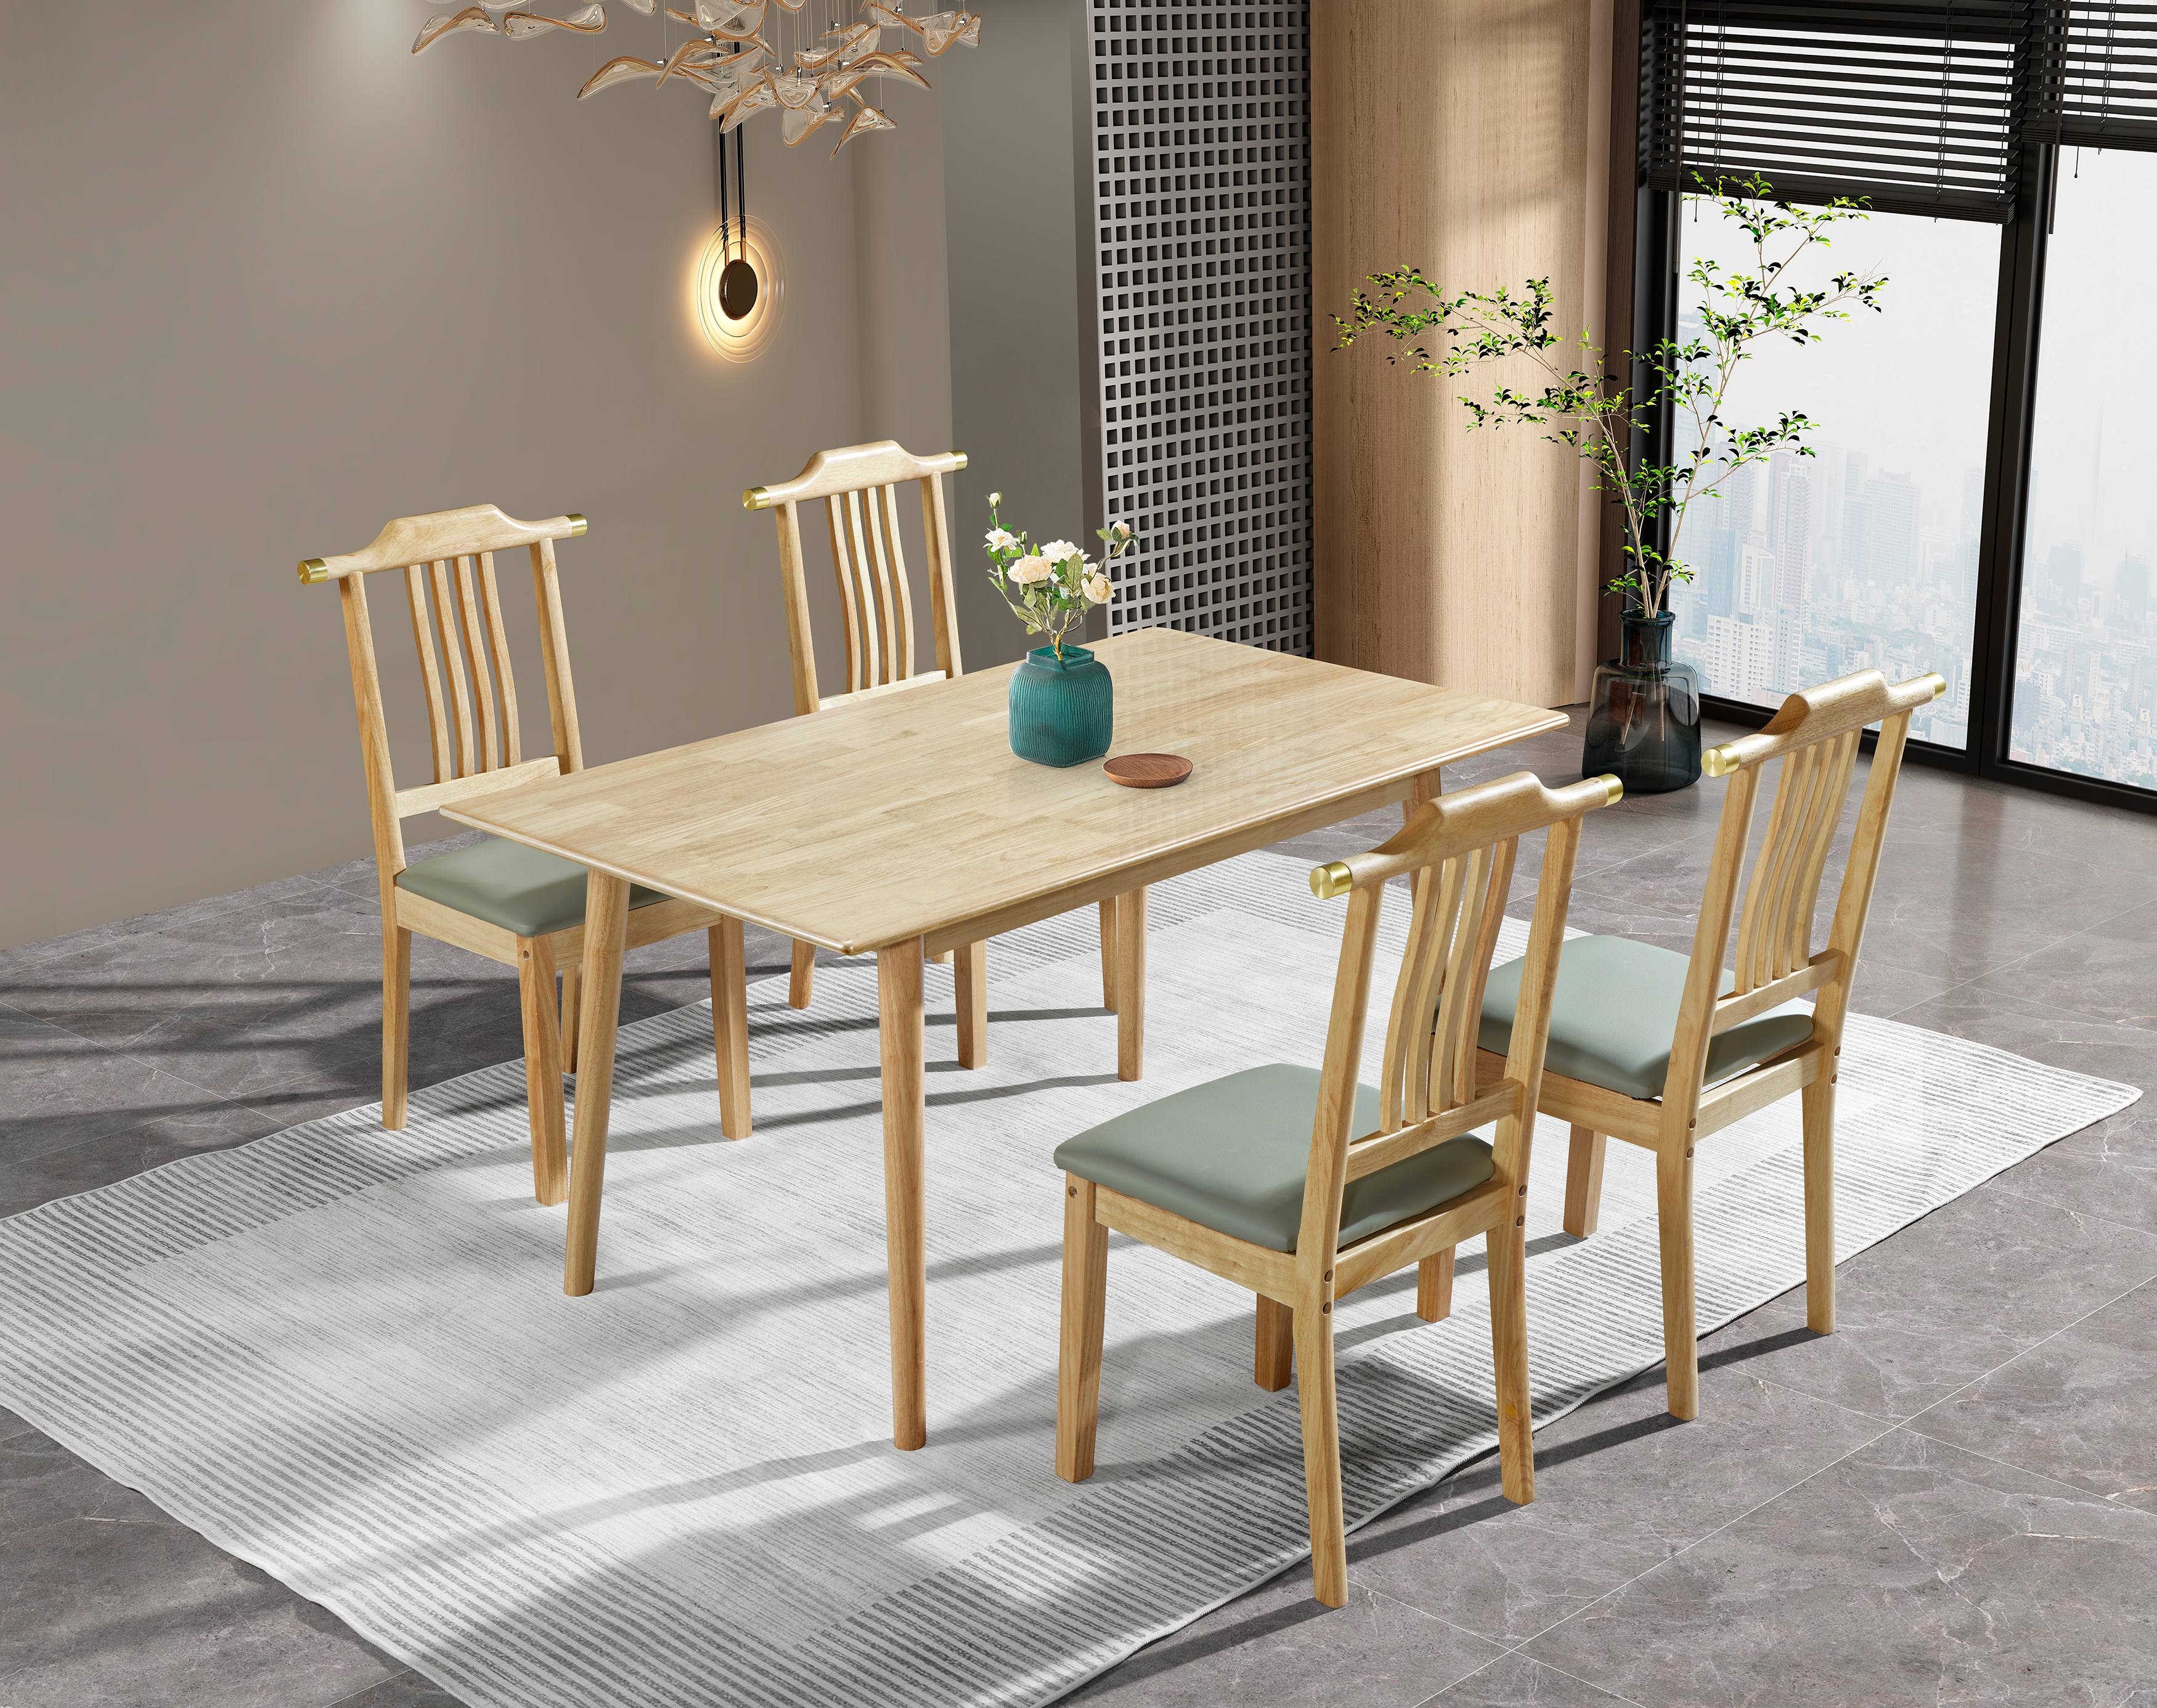 1 Table + chairs(1-6L#)